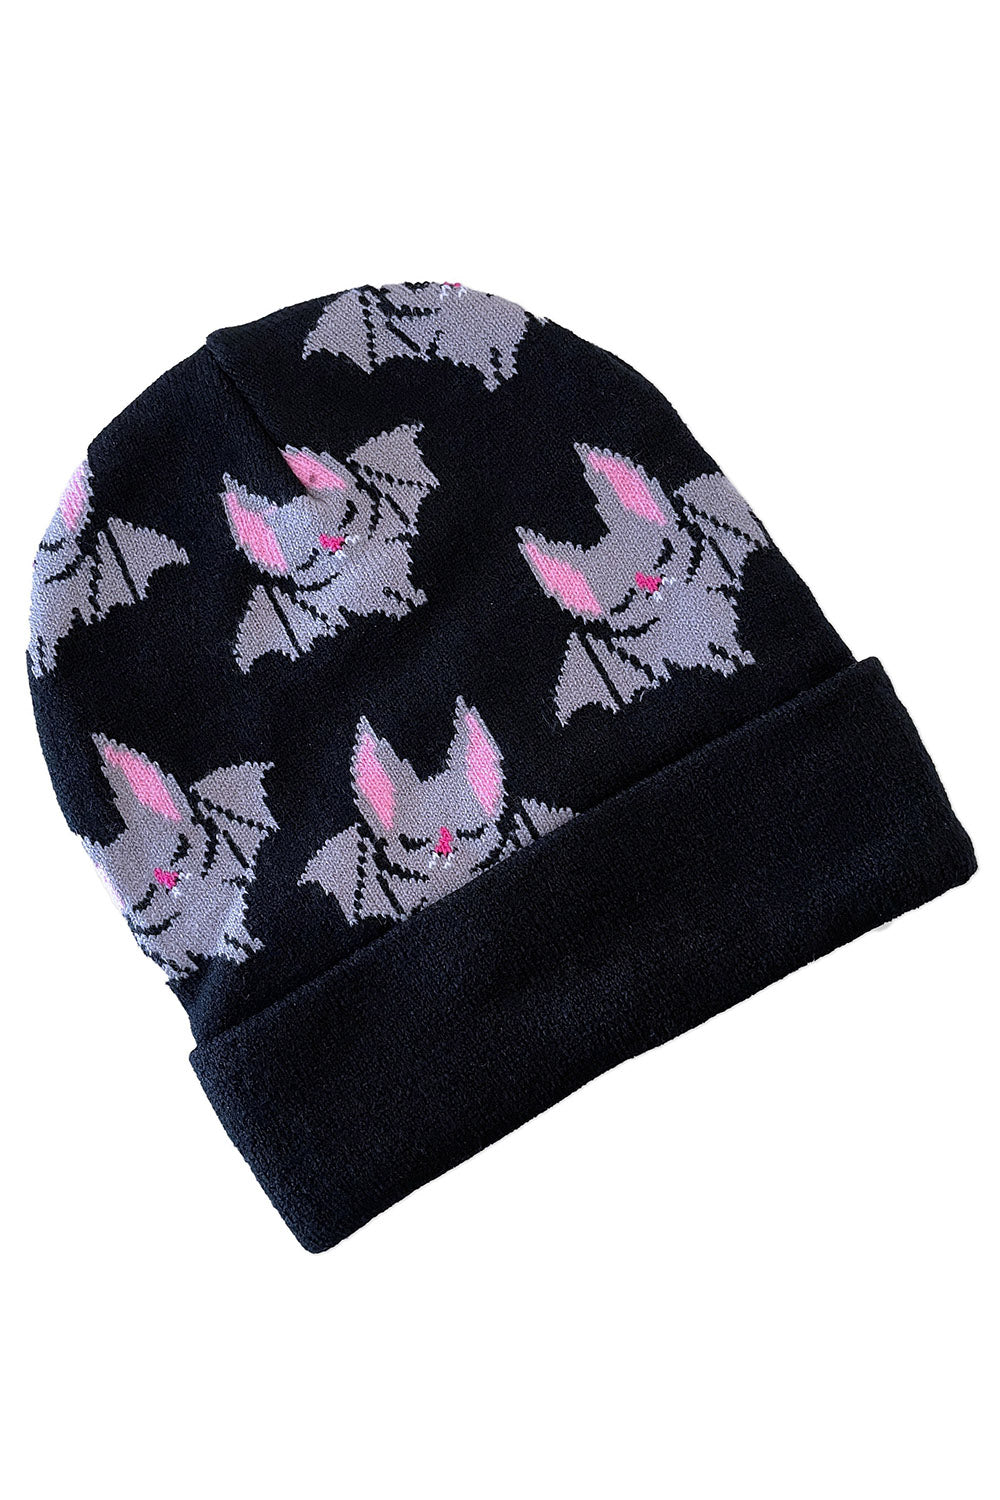 beanie embroidered with bats